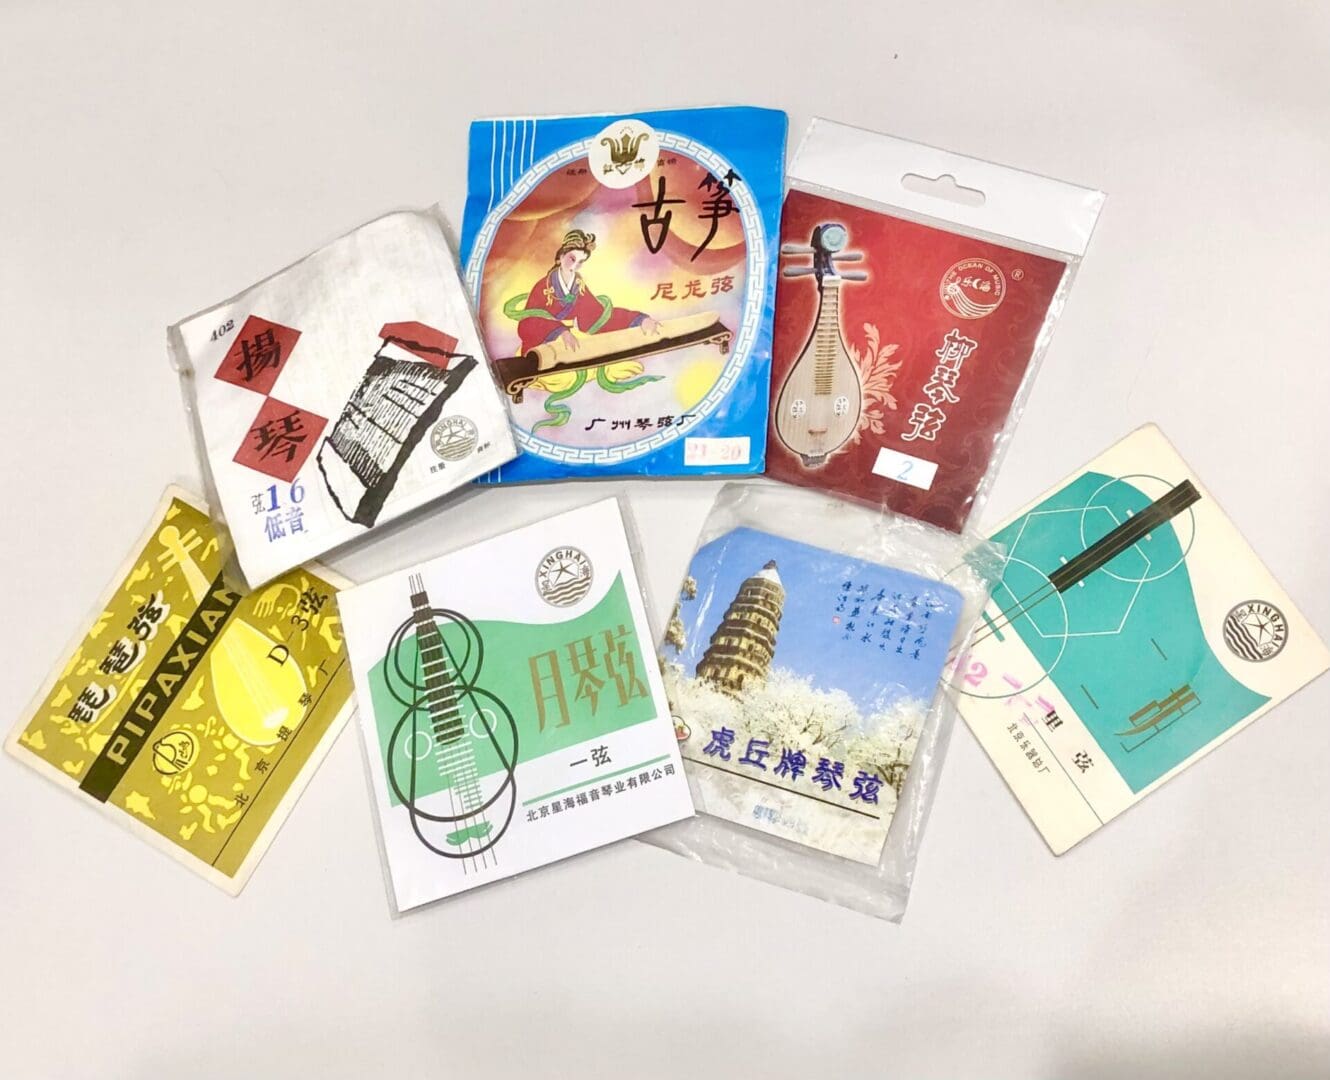 A variety of packages of Chinese instrument strings.